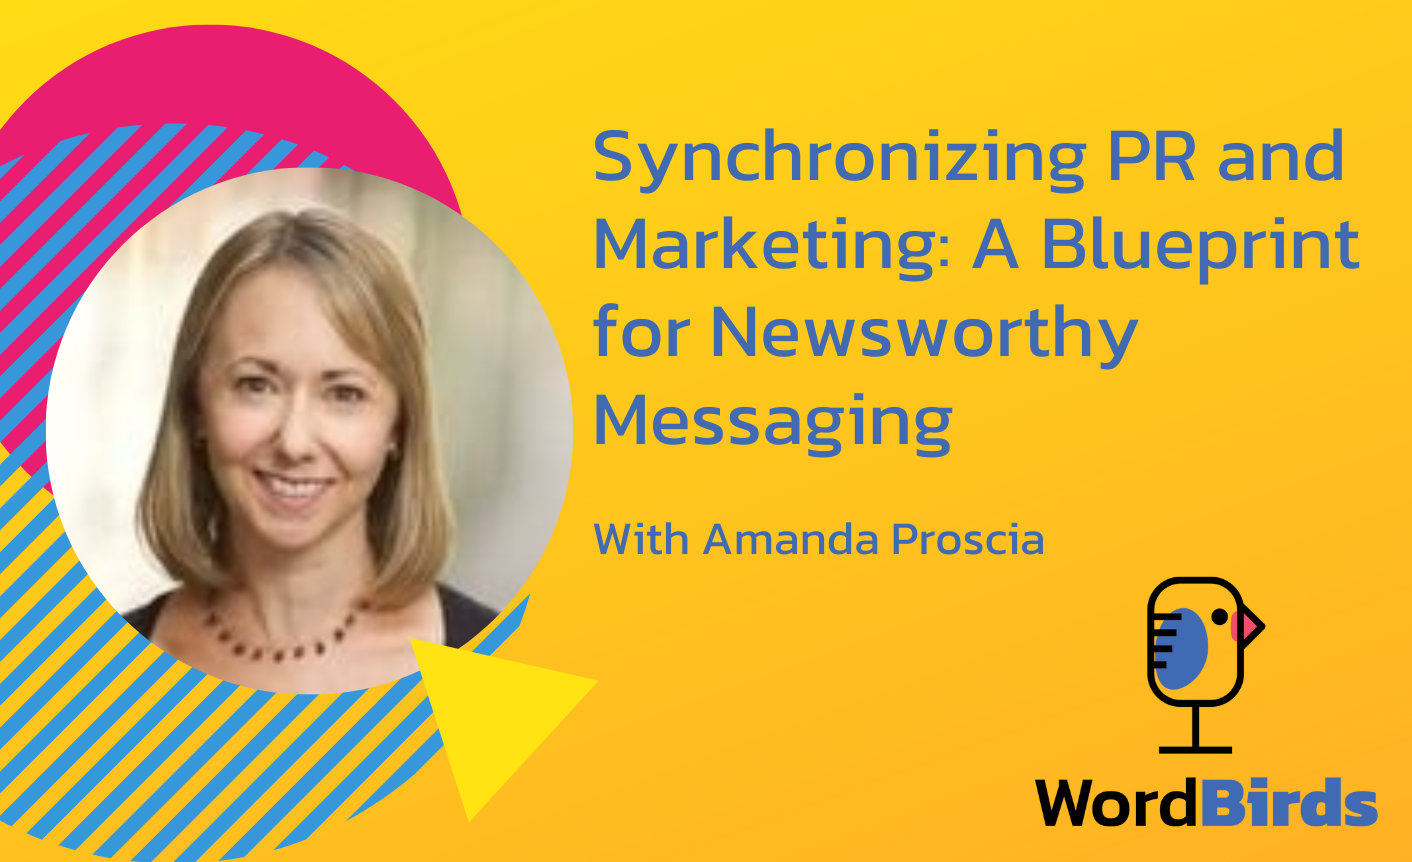 On a yellow background with a headshot of Amanda Proscia on the left, the title reads "Synchronizing PR and Marketing: A Blueprint for Newsworthy Messaging."